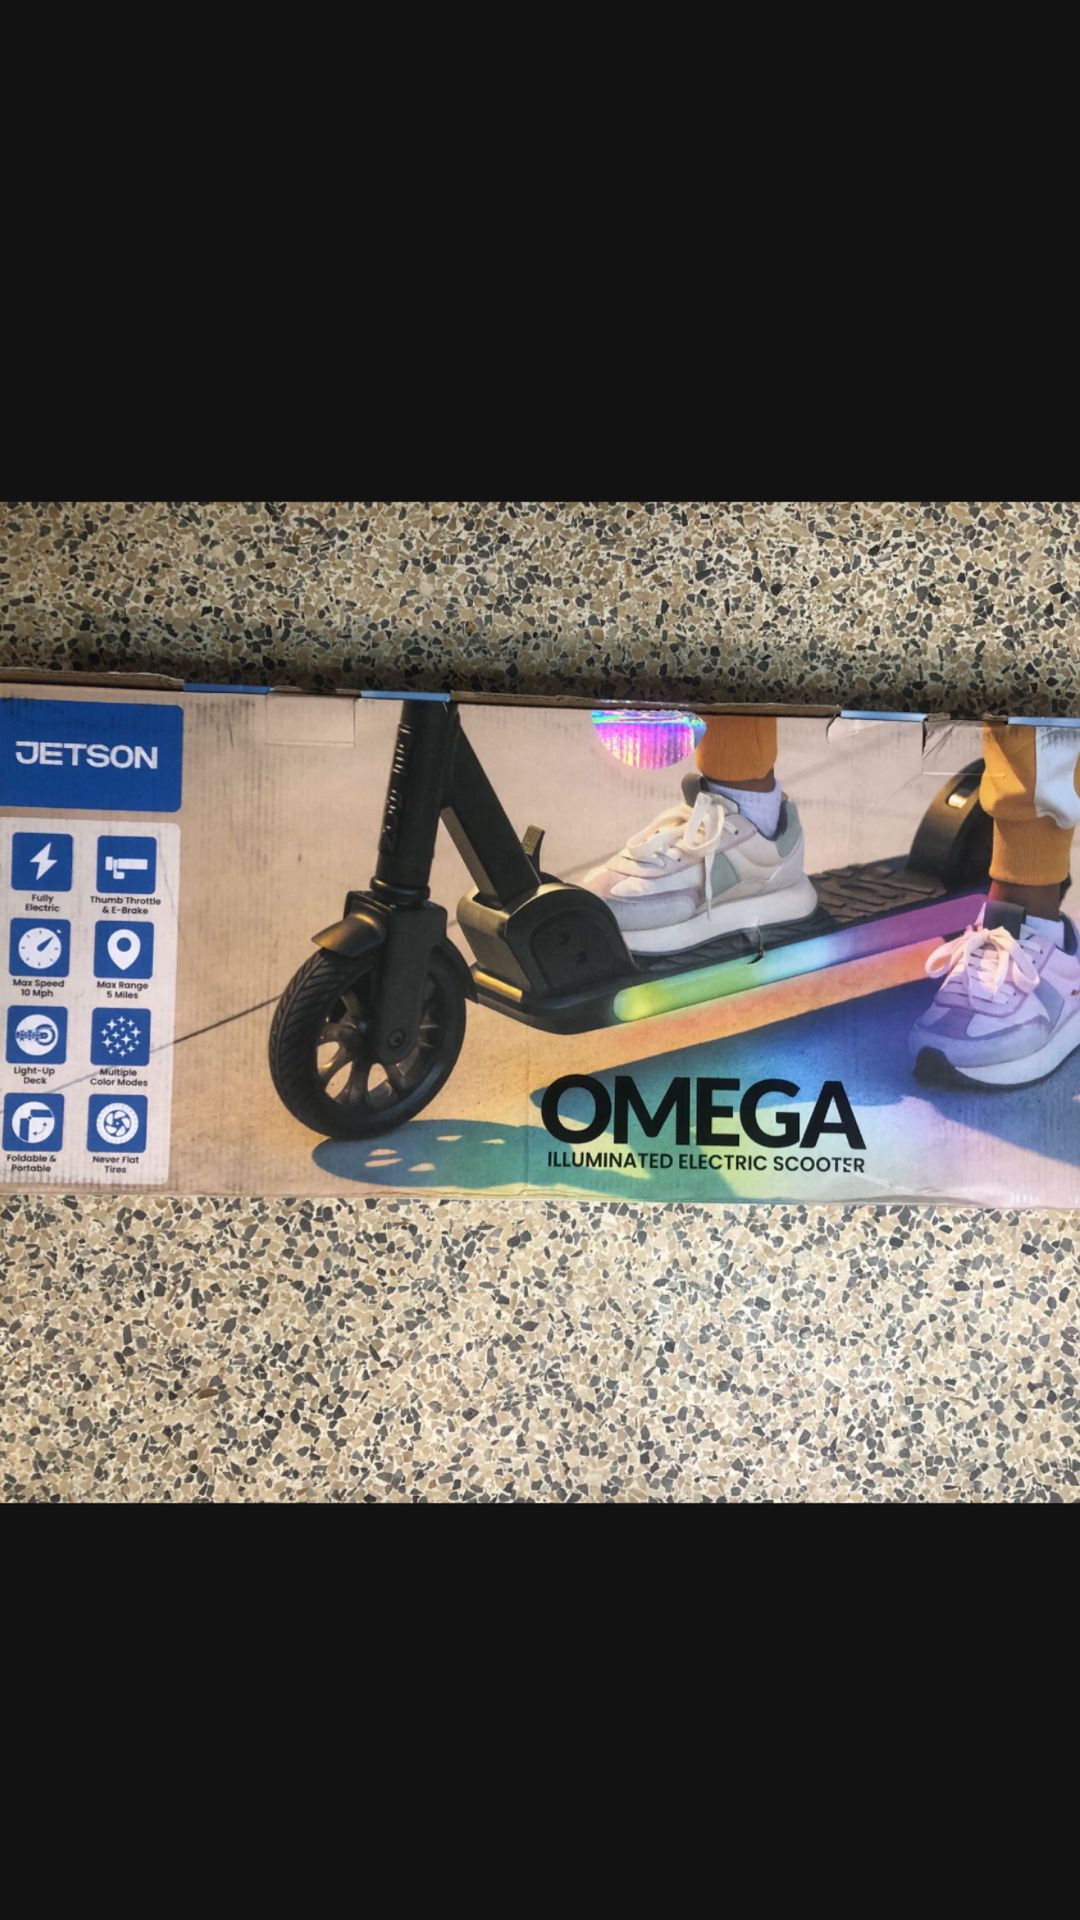 Jetson Omega Electric Scooter 5-10MPH Up to 5 miles, Foldable